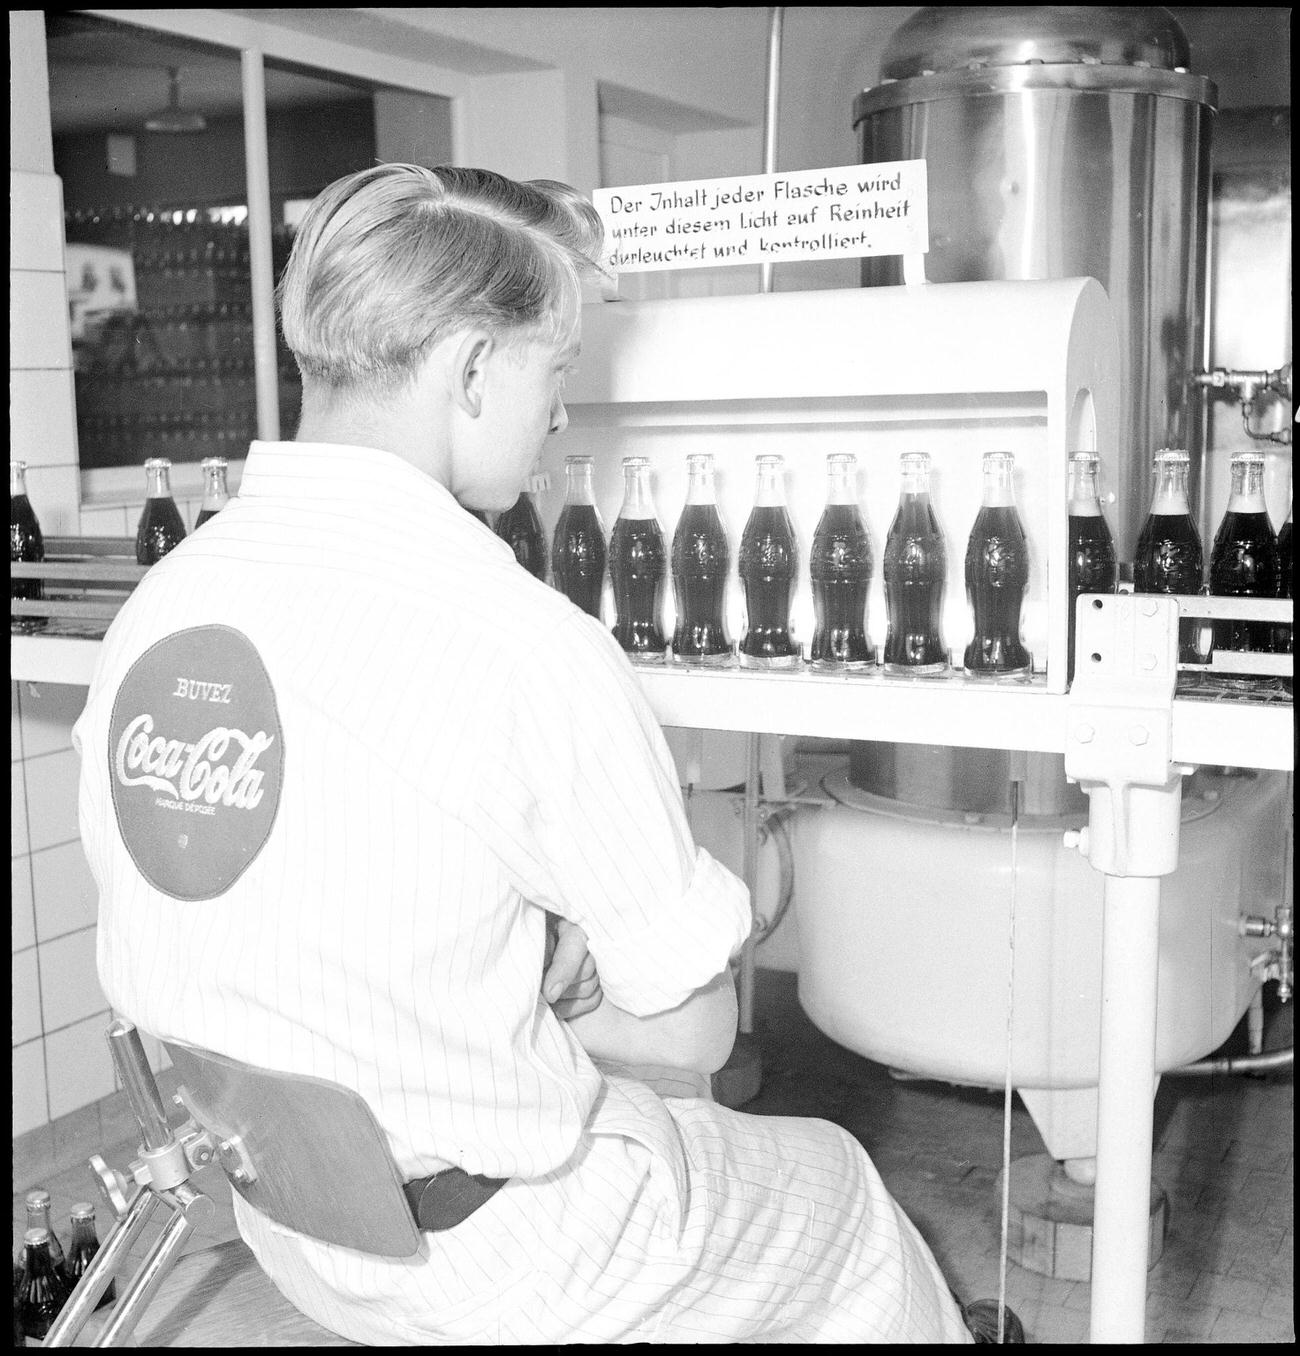 Coca-Cola worker at a bottling plant in Zurich, 1950.